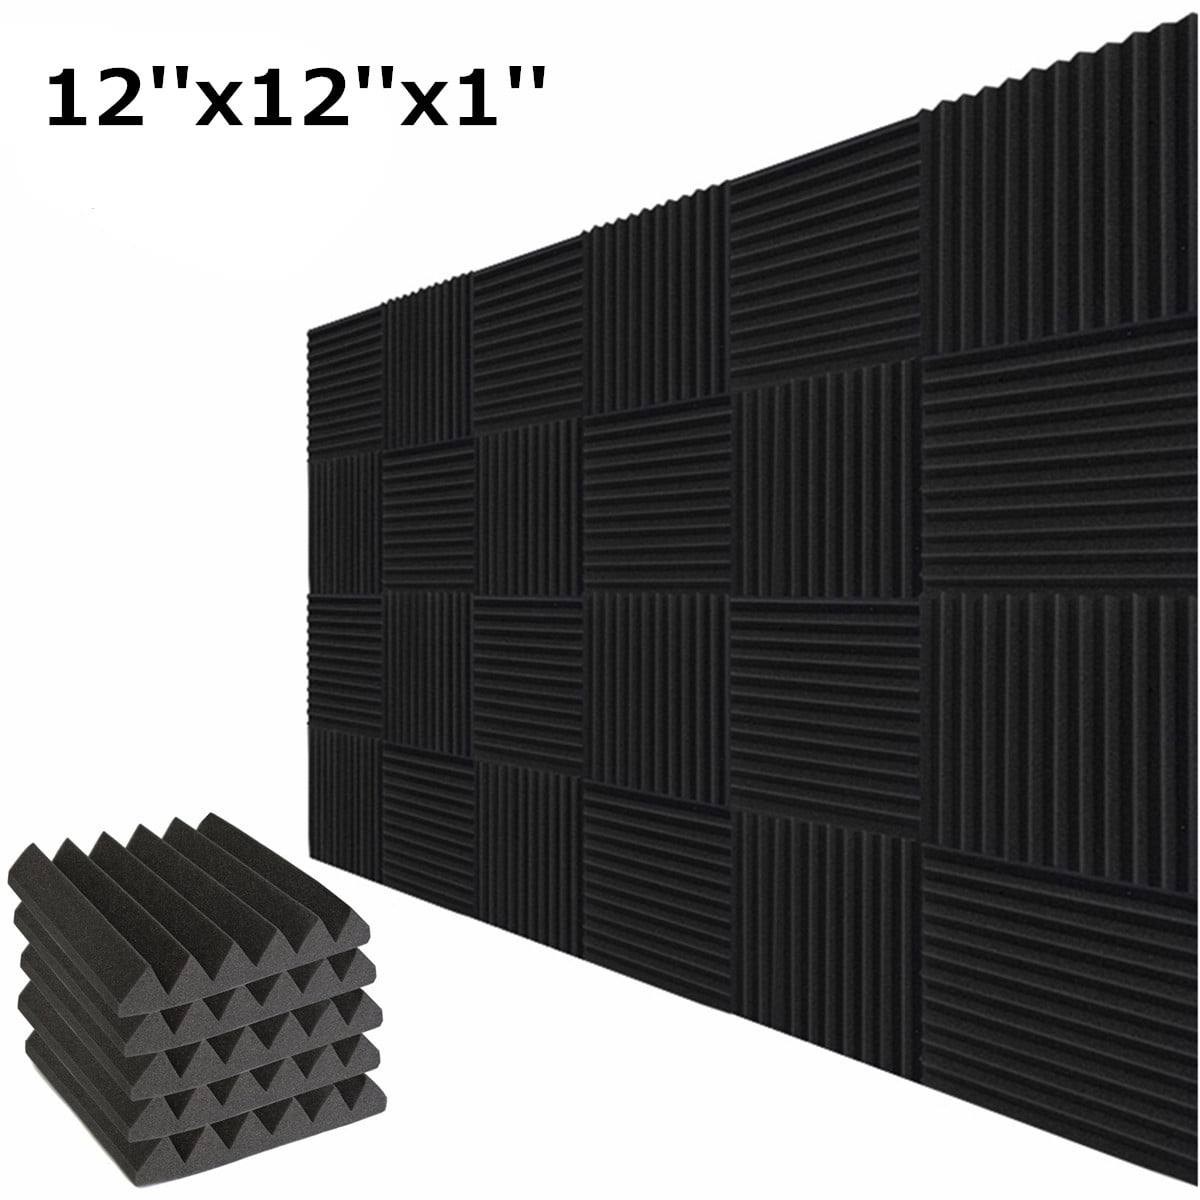 96 PACK Acoustic Foam Panel Wedge Studio Soundproofing 12”x12"x1"Wall Tiles Lot 